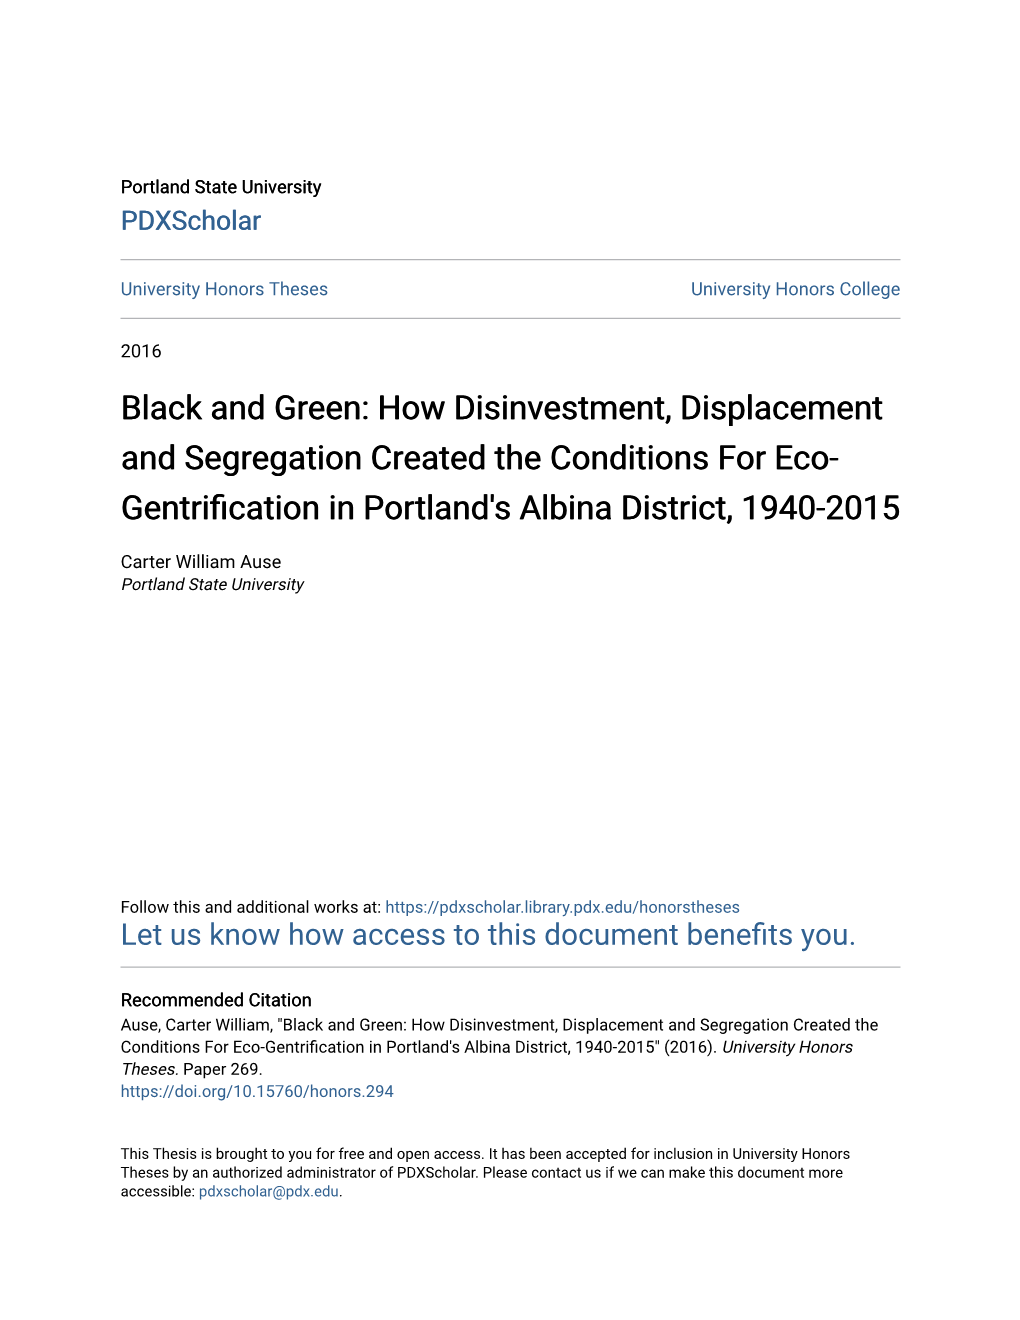 How Disinvestment, Displacement and Segregation Created the Conditions for Eco- Gentrification in Orp Tland's Albina District, 1940-2015